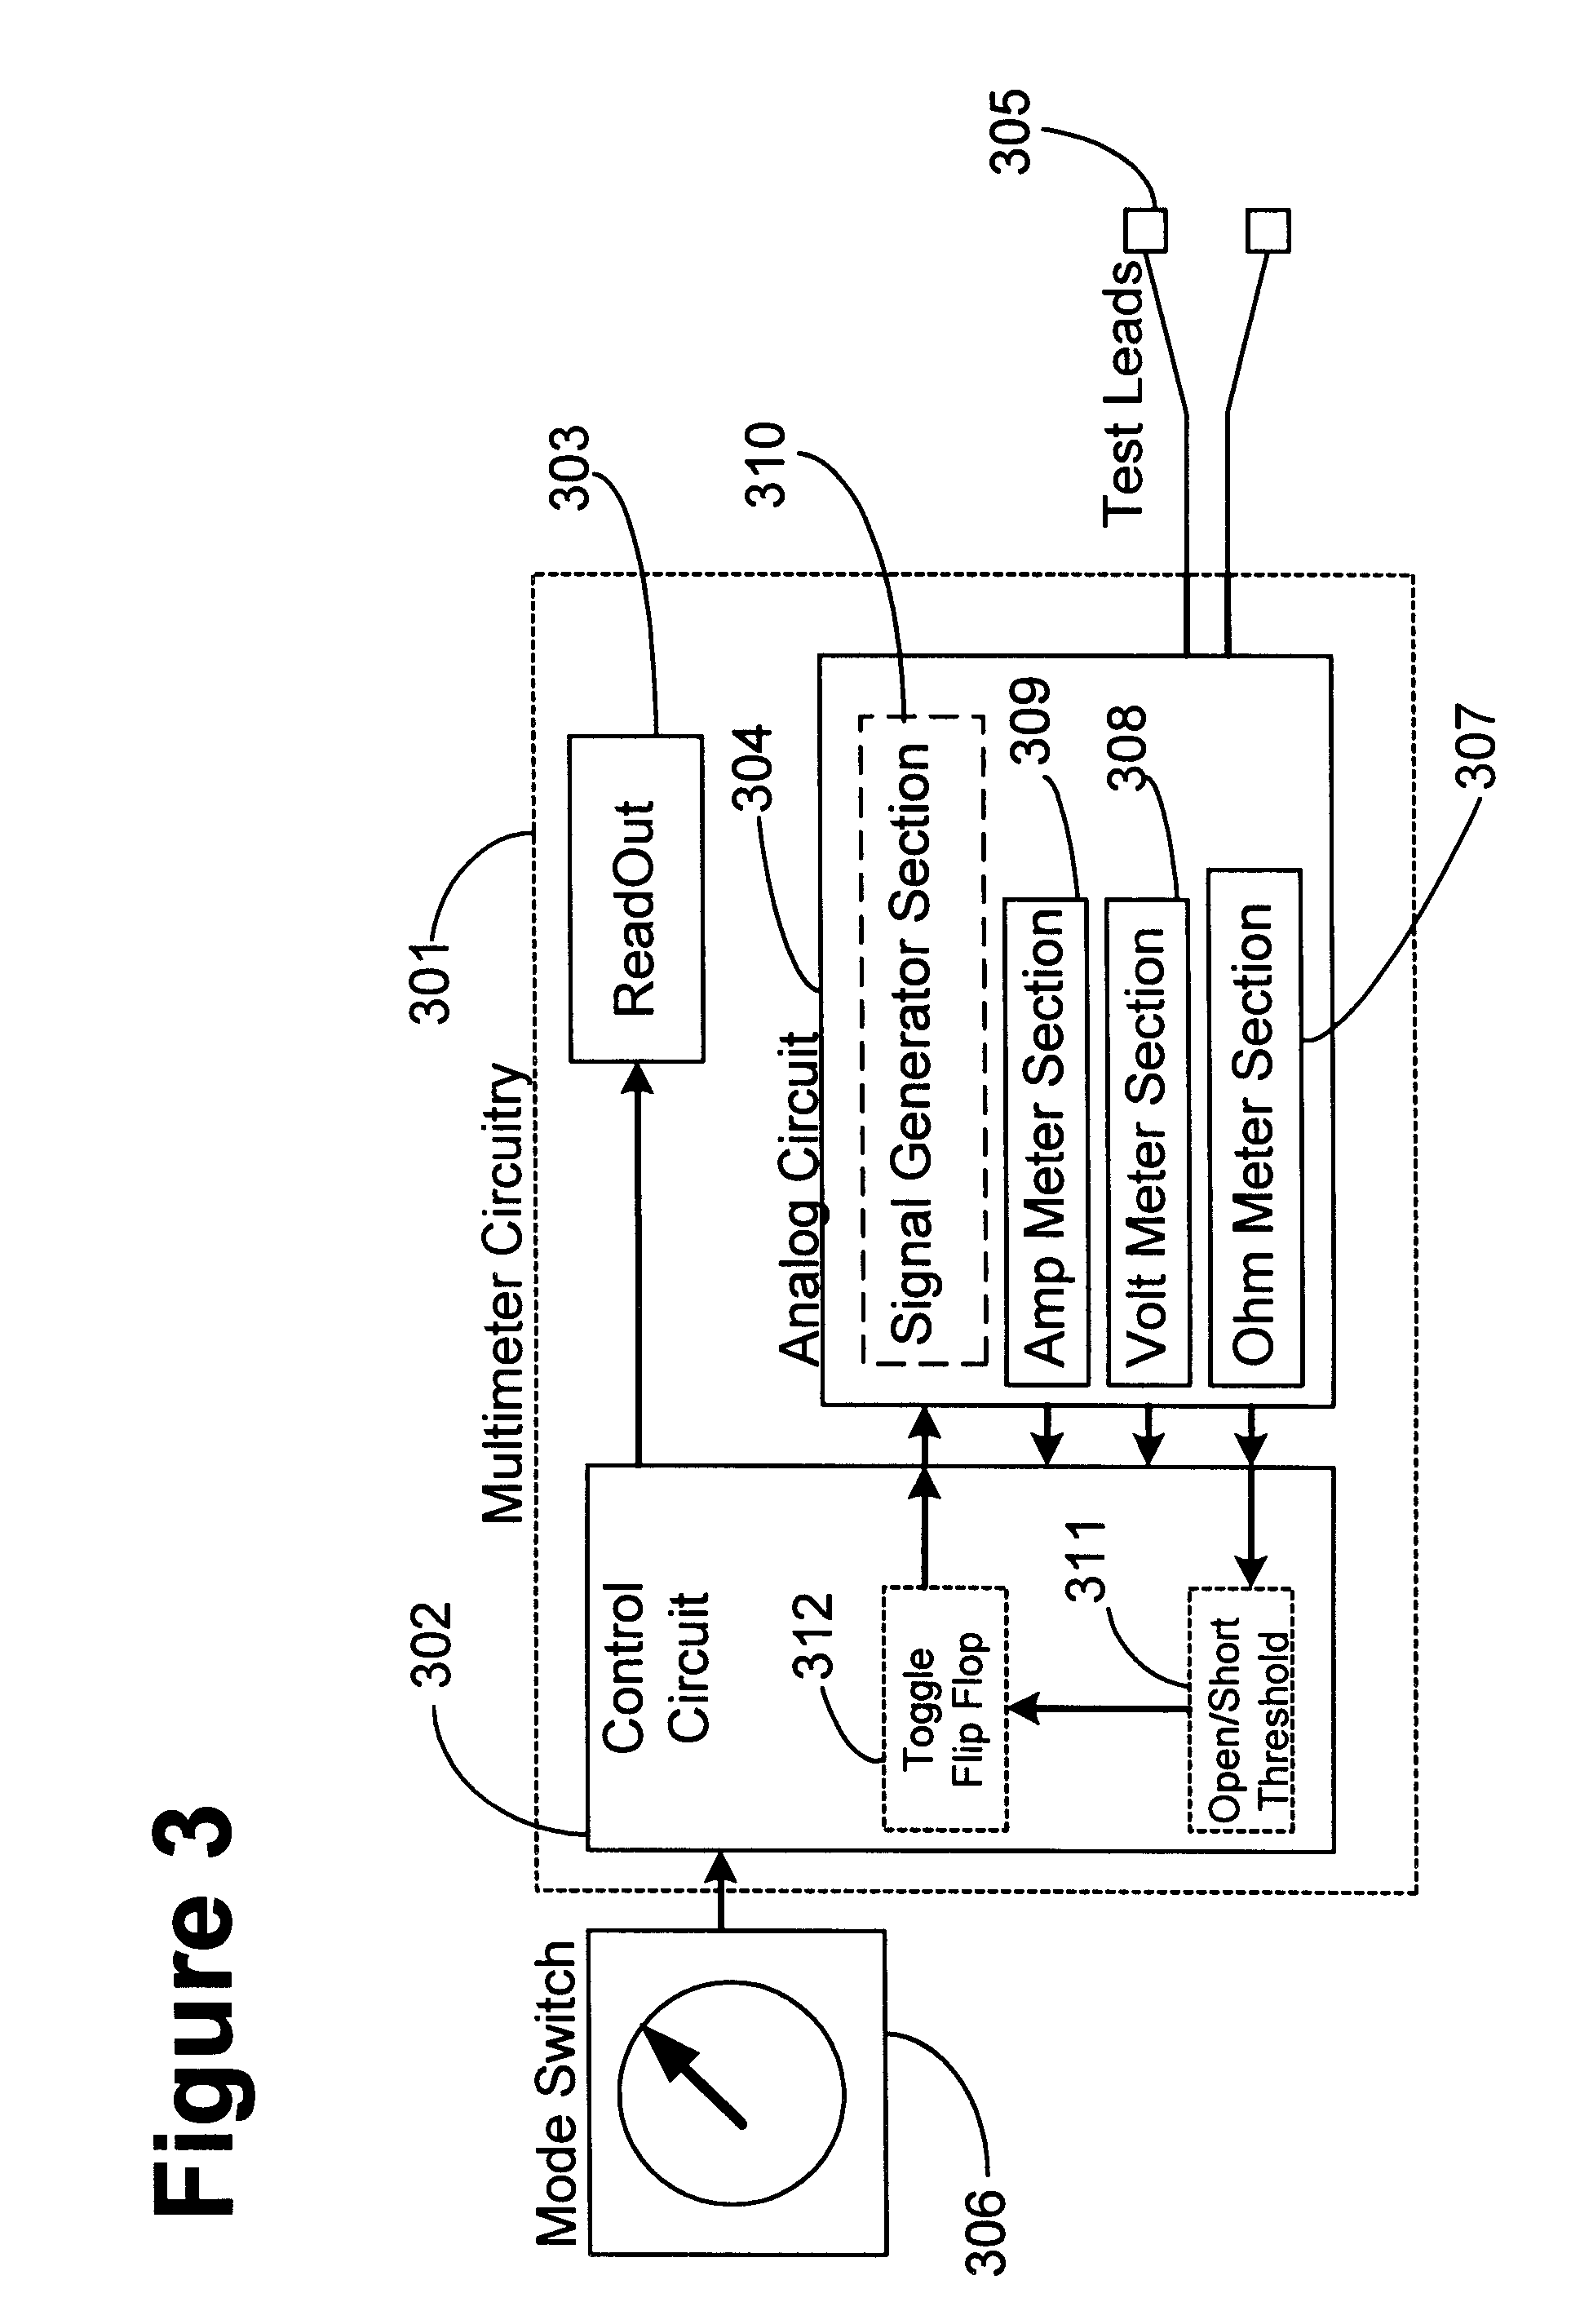 Method and apparatus for remotely changing signal characteristics of a signal generator